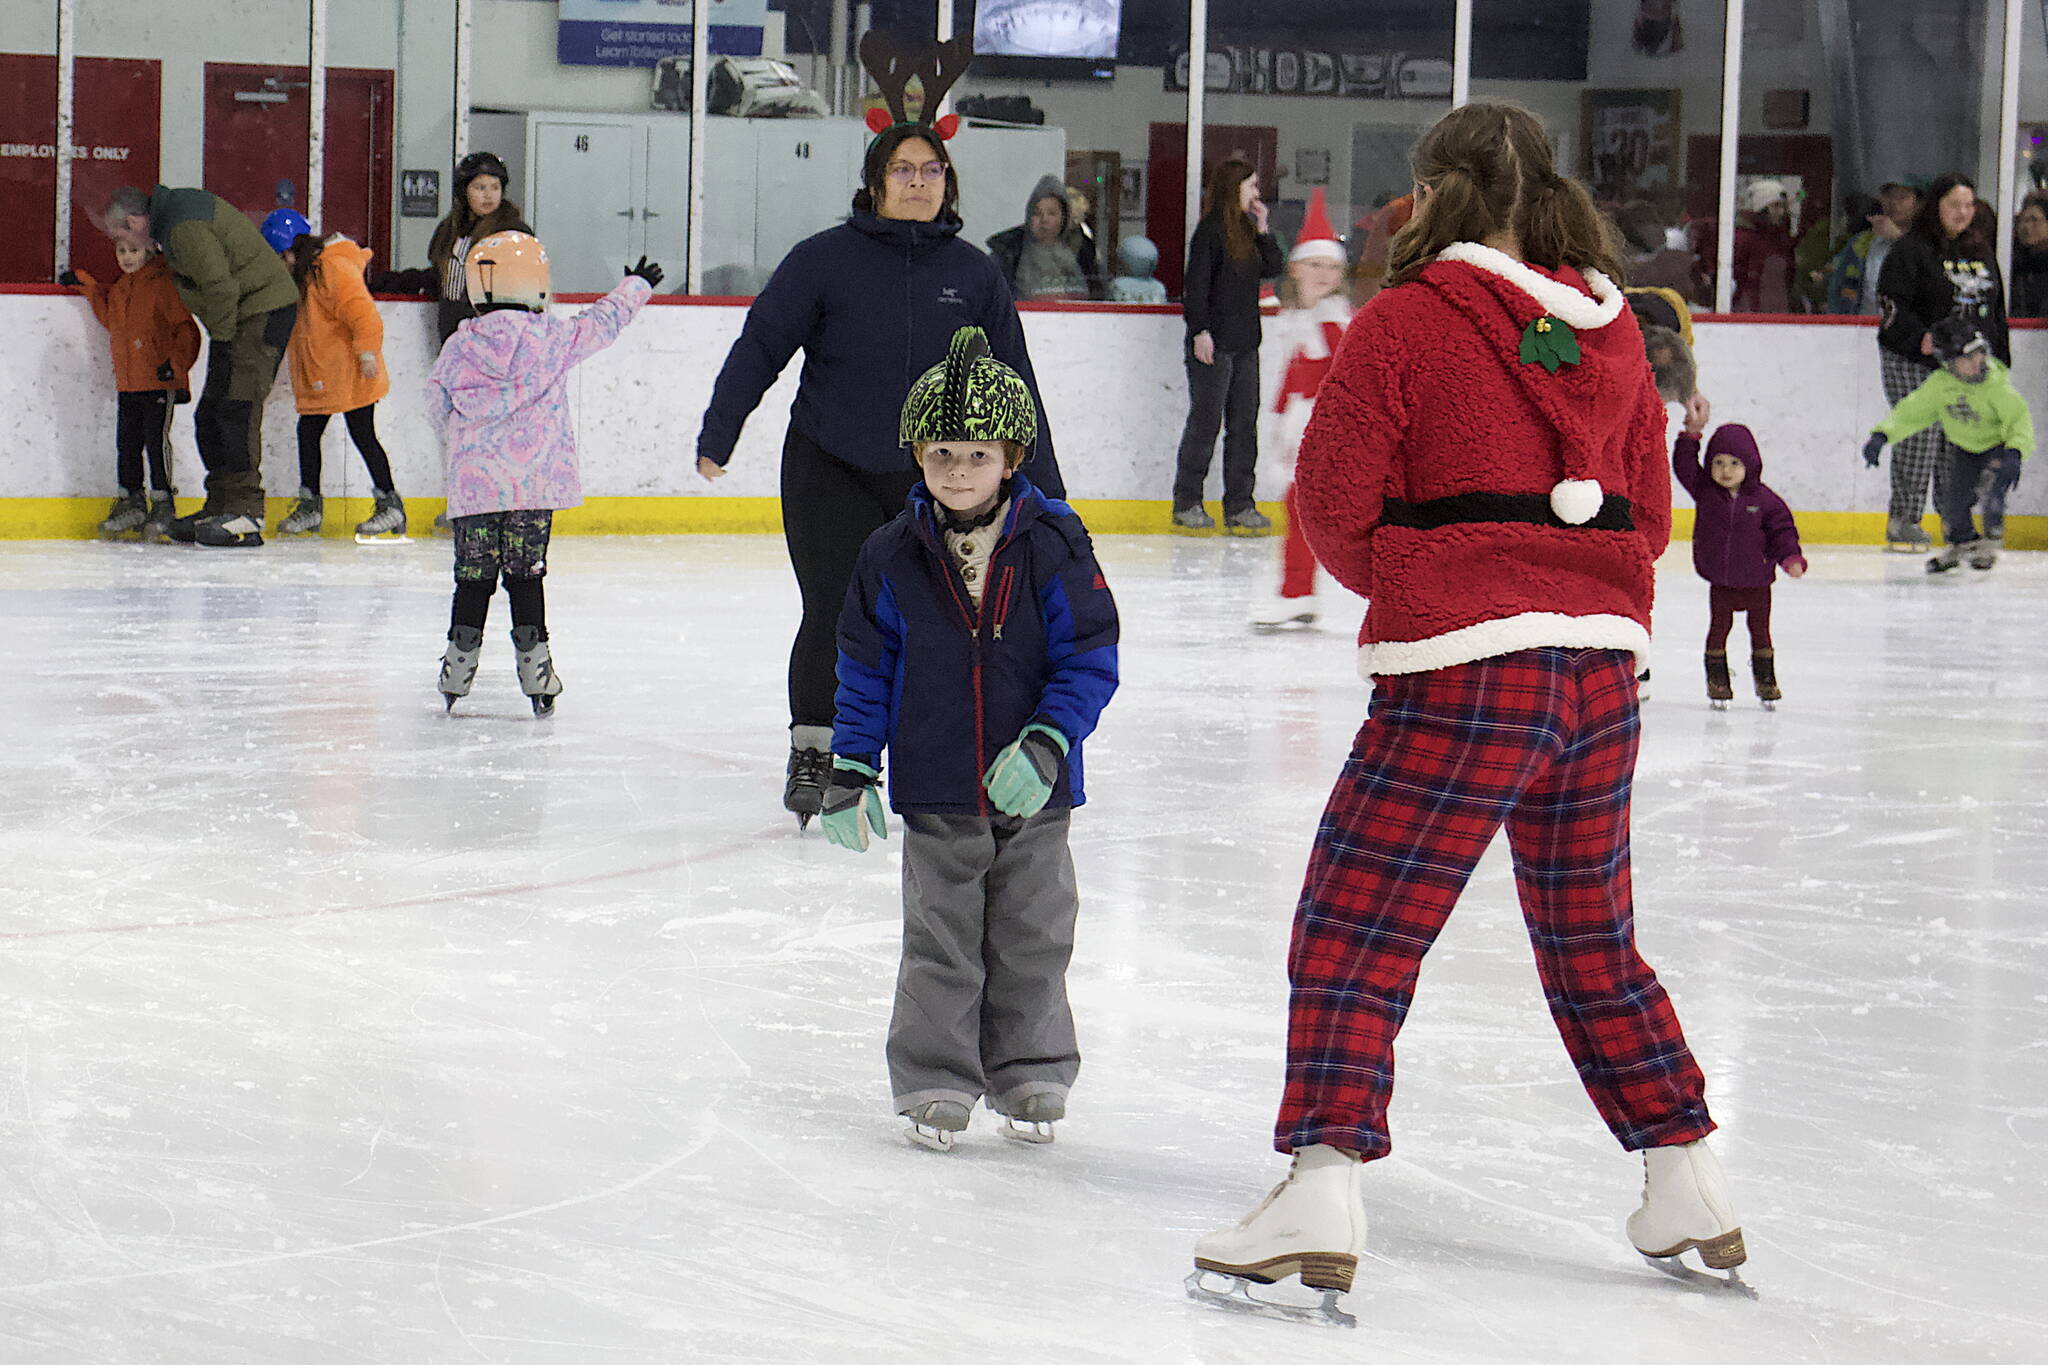 One of Santa’s helpers coaxes a skater along the ice during the annual Santa Skate at Treadwell Arena on Friday night.(Mark Sabbatini / Juneau Empire)